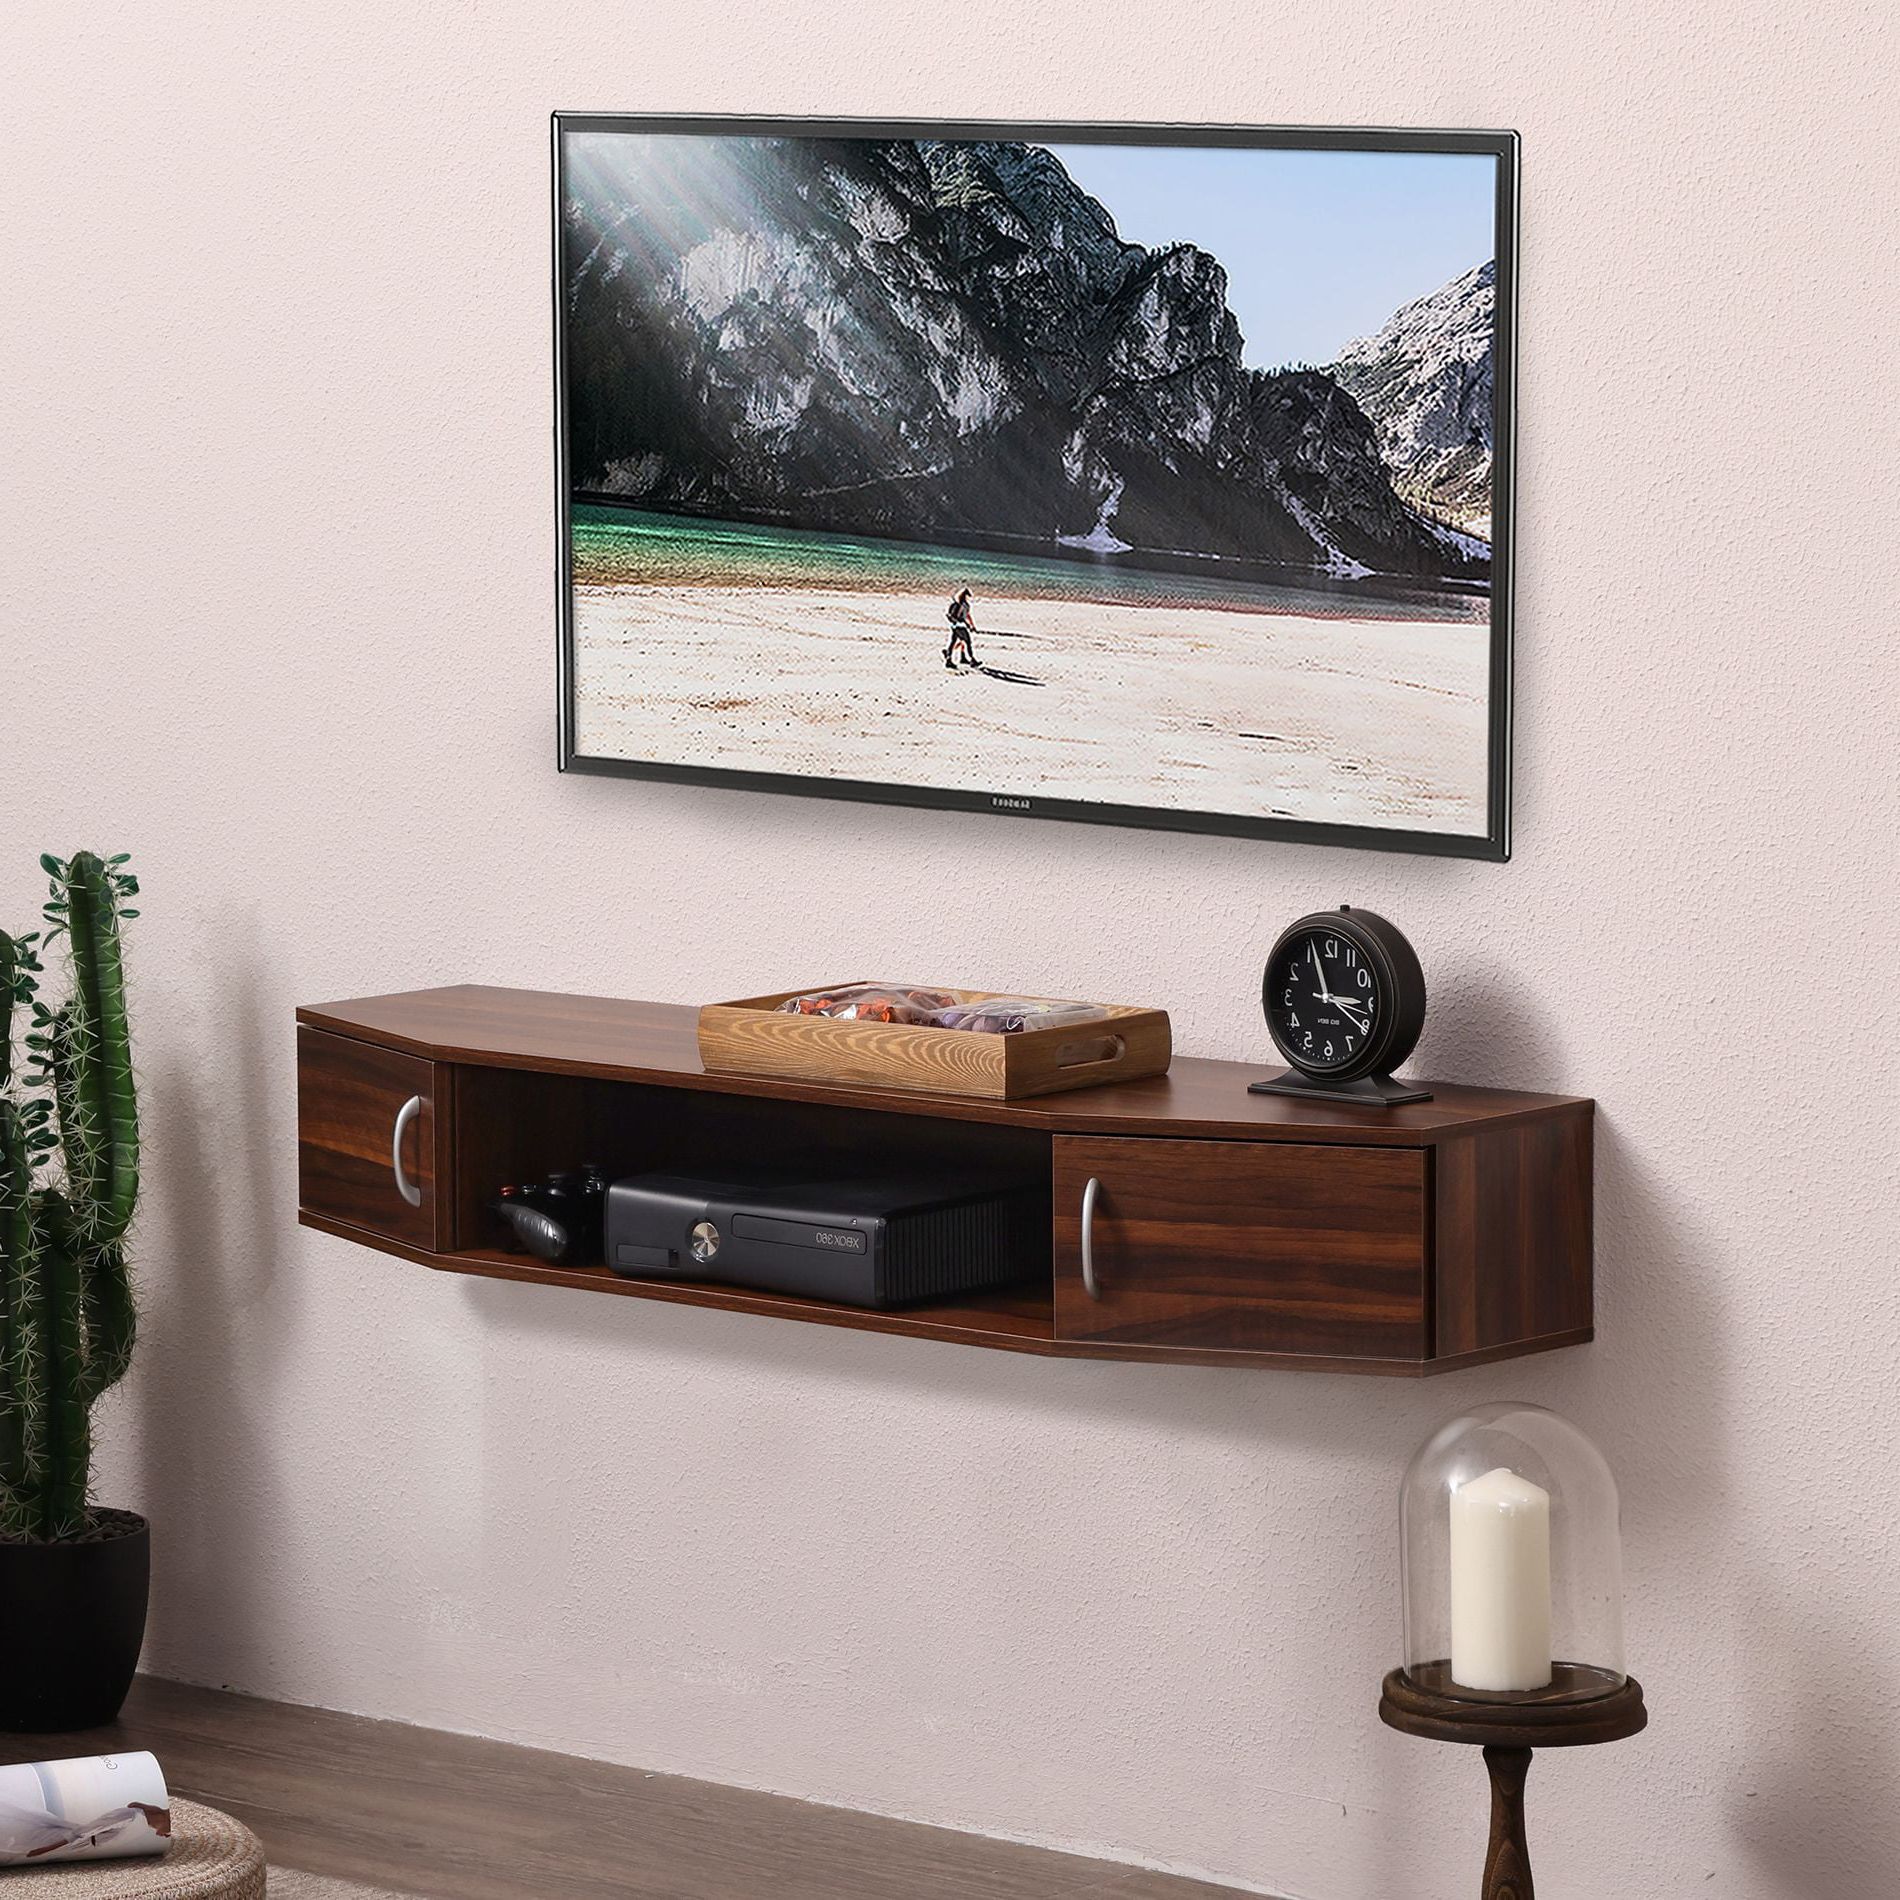 Popular Fitueyes Floating Tv Stand Wall Mounted Entertainment Center Media For Wall Mounted Floating Tv Stands (View 11 of 15)